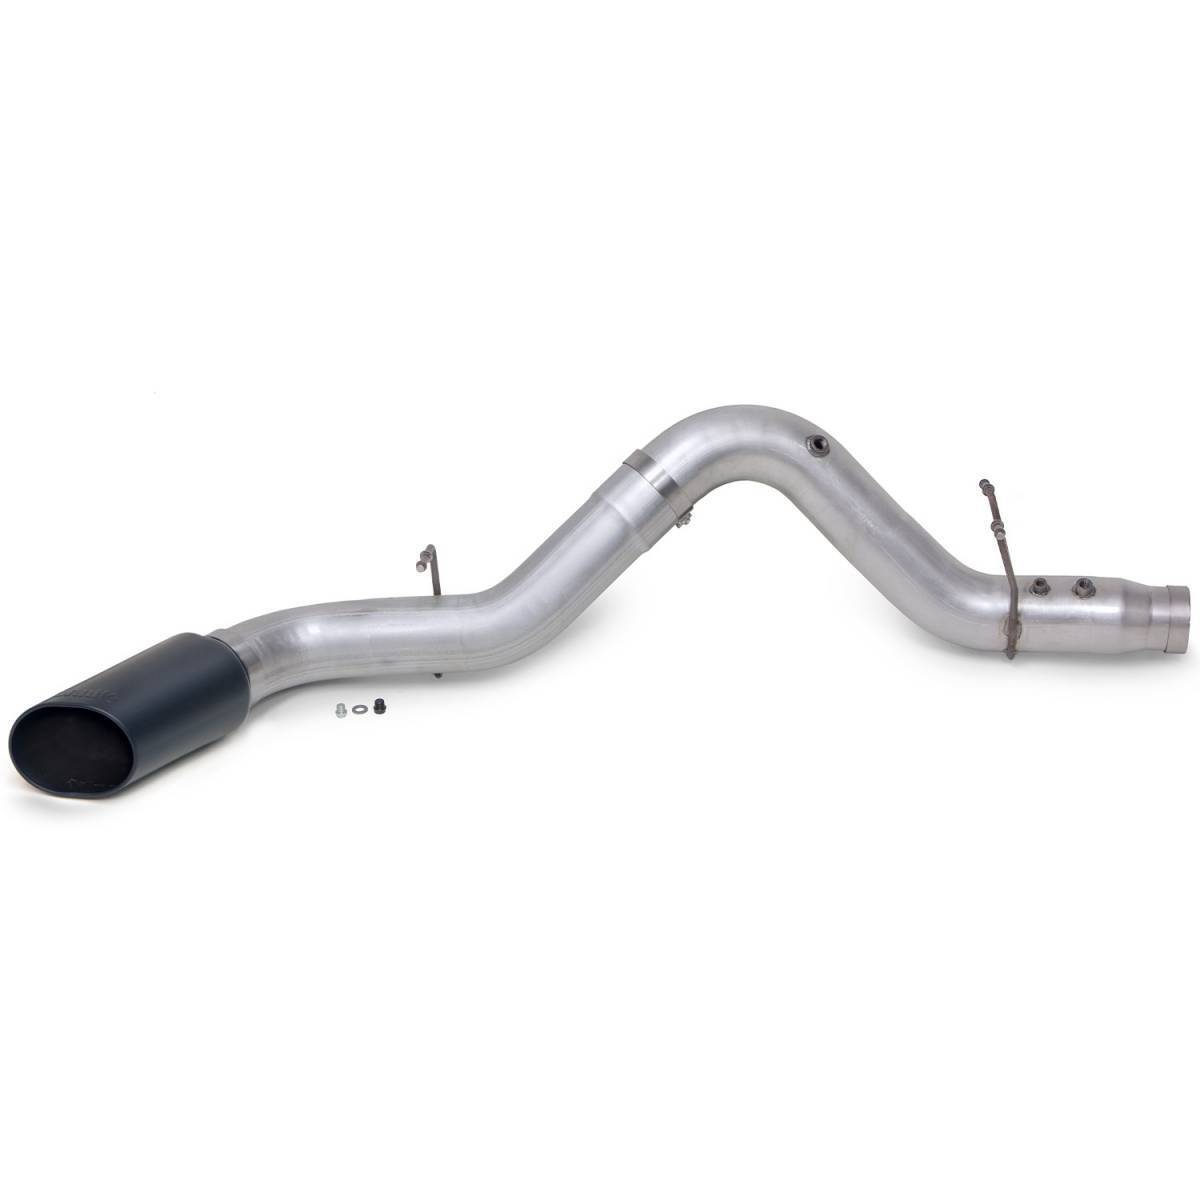 Monster Exhaust System, 5-inch Single Exit, Chrome SideKick Tip